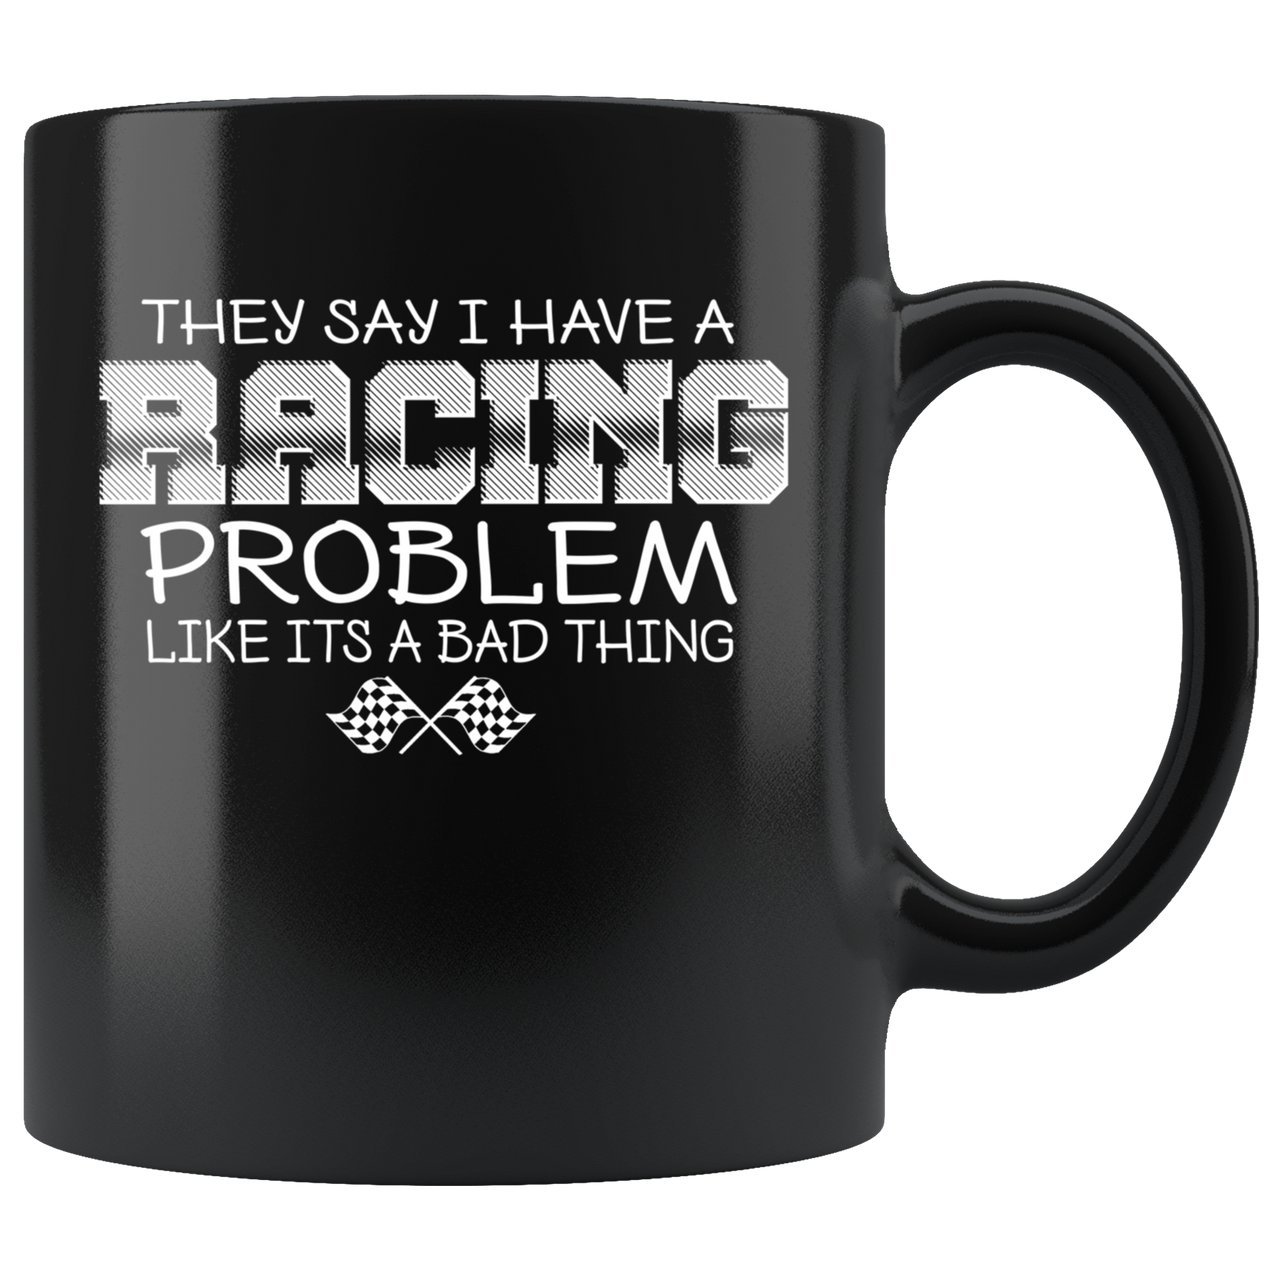 They Say I Have A Racing Problem Like It's A Bad Thing Mug!